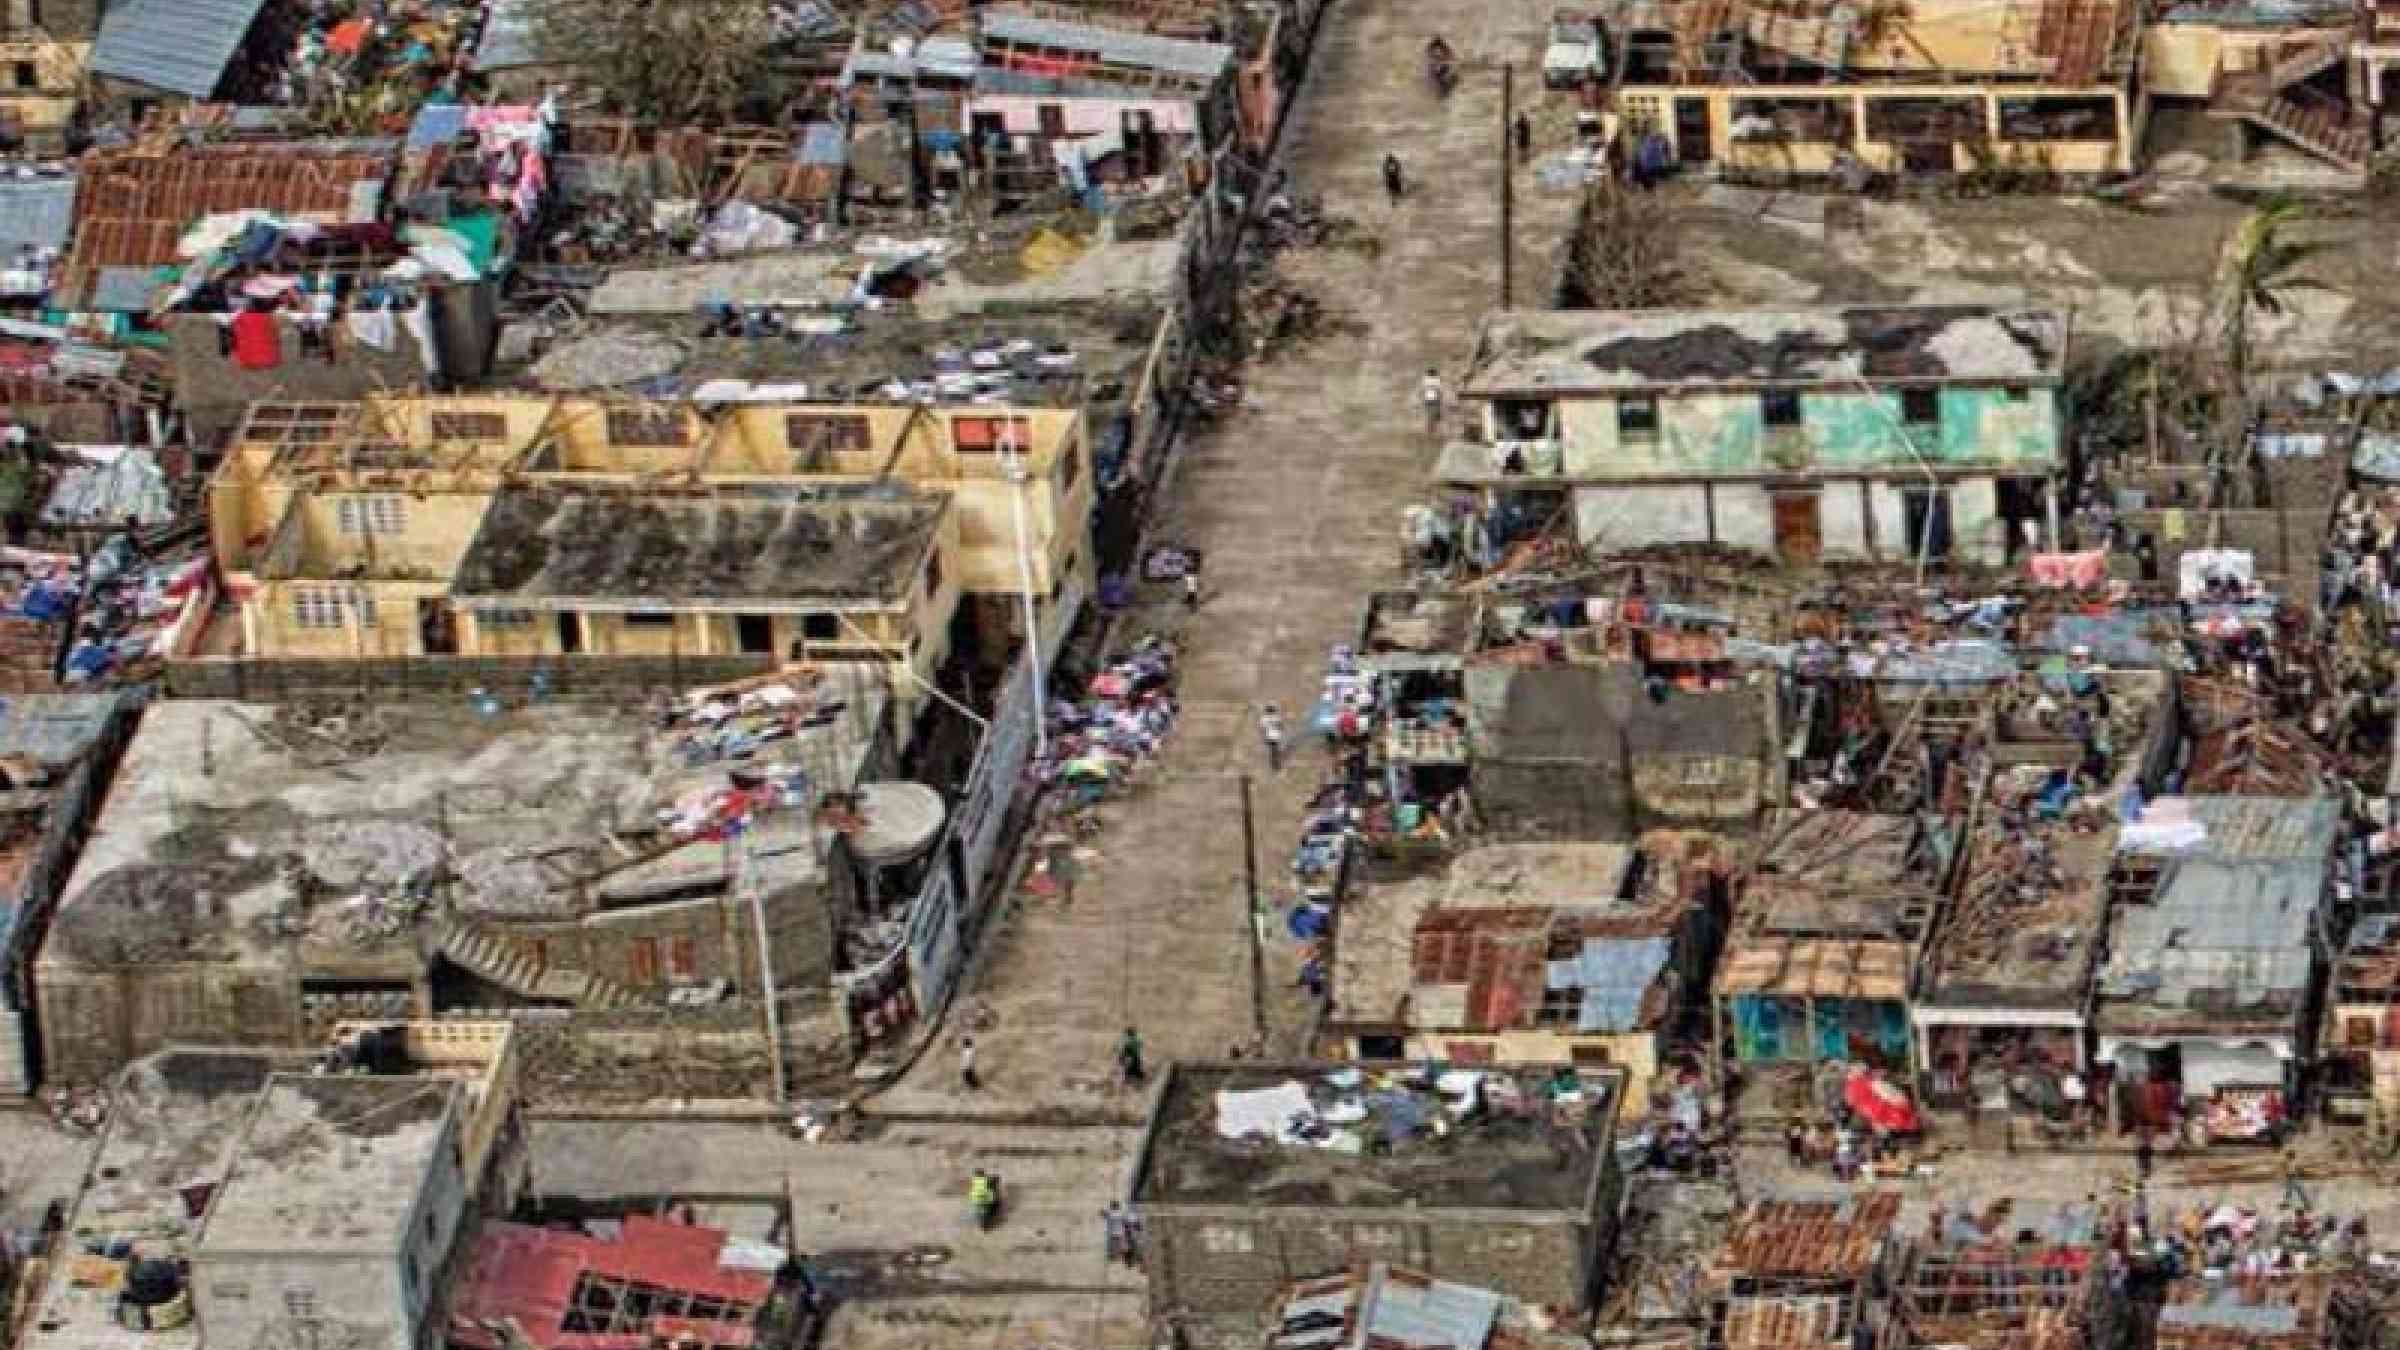 The town of Les Cayes after it was hit by Hurricane Matthew (credit: MINUSTAH)